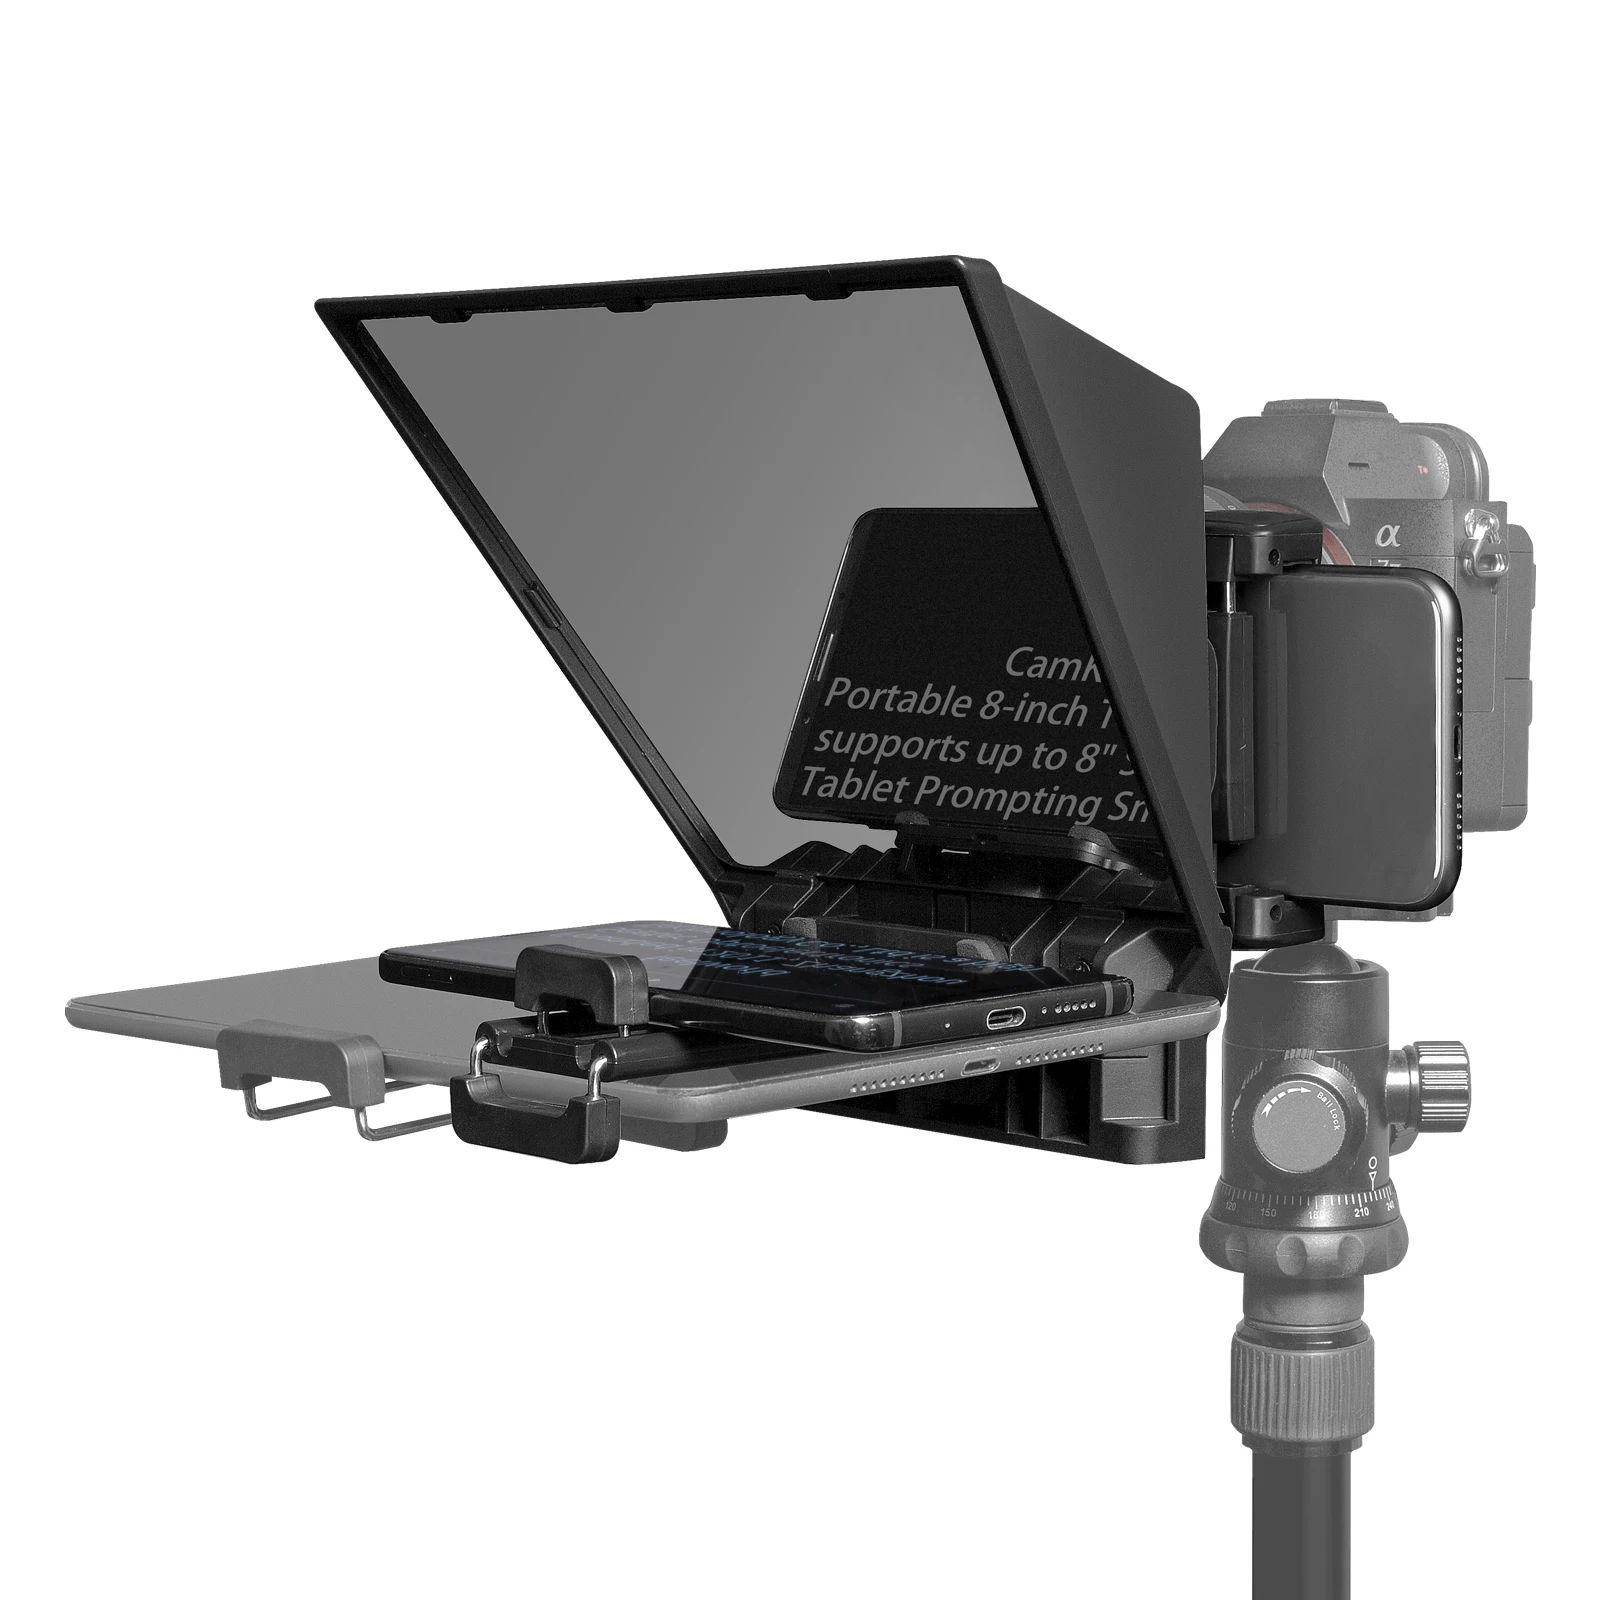 

Camkoo Teleprompter for 8 inch Tablet For iPad for Smartphone DSLR Camera Prompting Speech Interview Live Prompter Reader